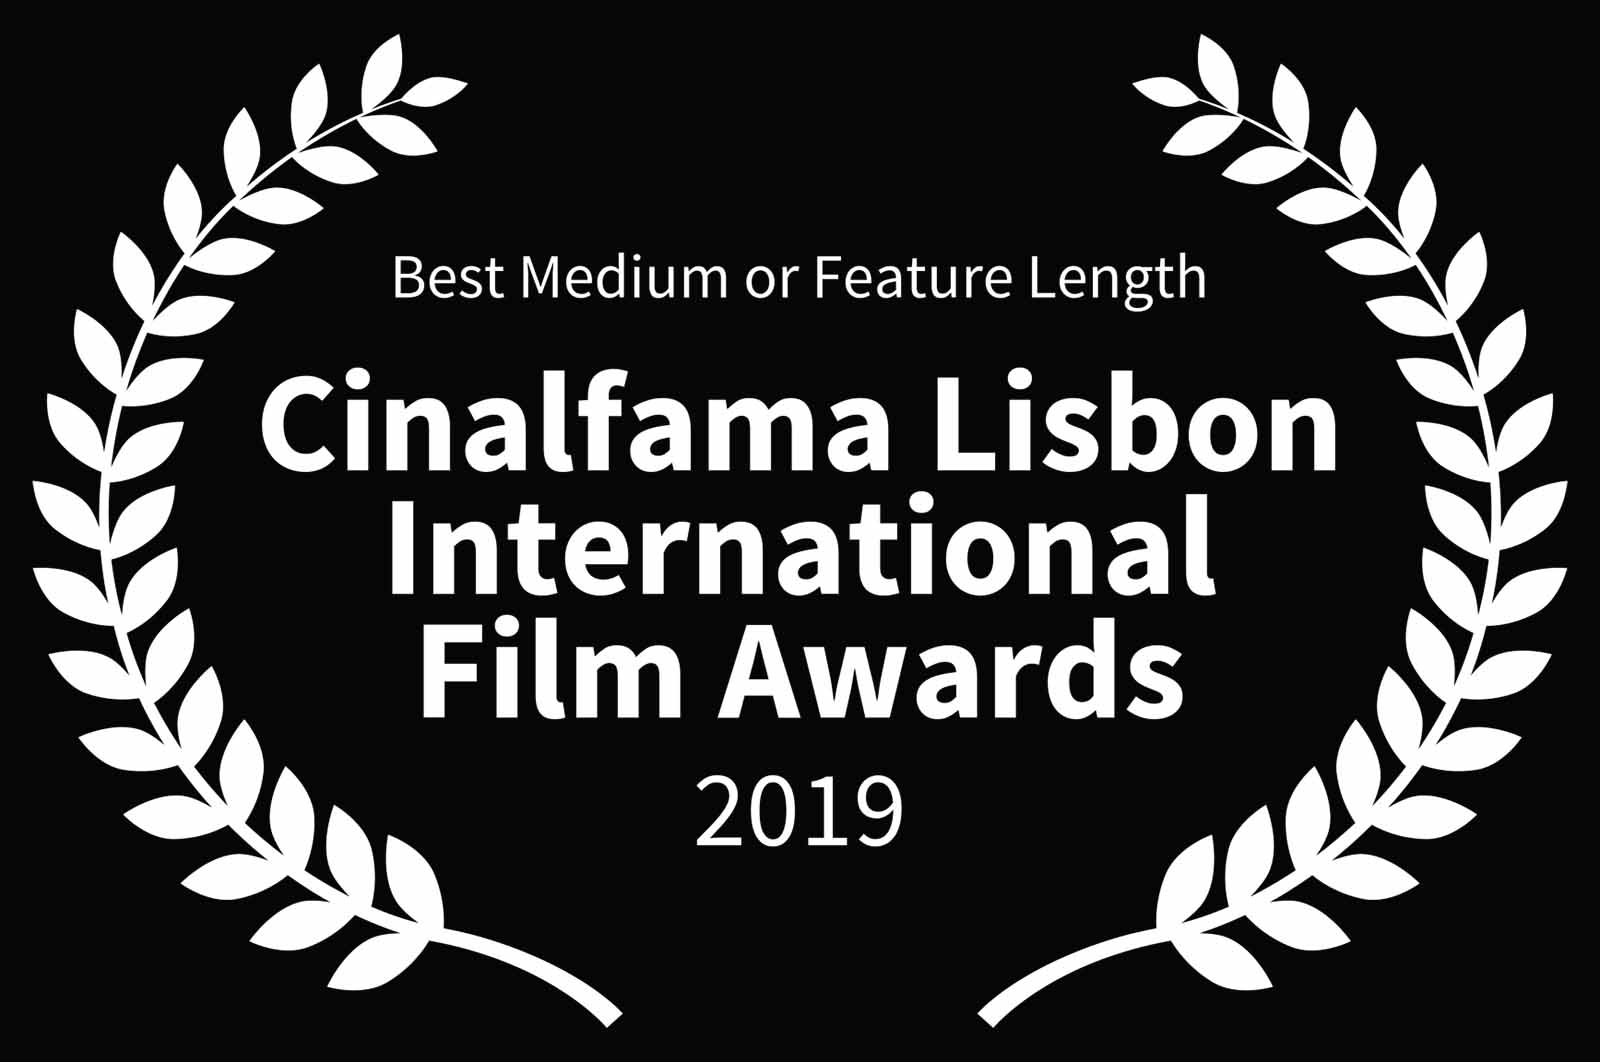 With an intimate location and historical city, the Cinalfama Lisbon International Film Festival offers people a chance to bear their soul through film.